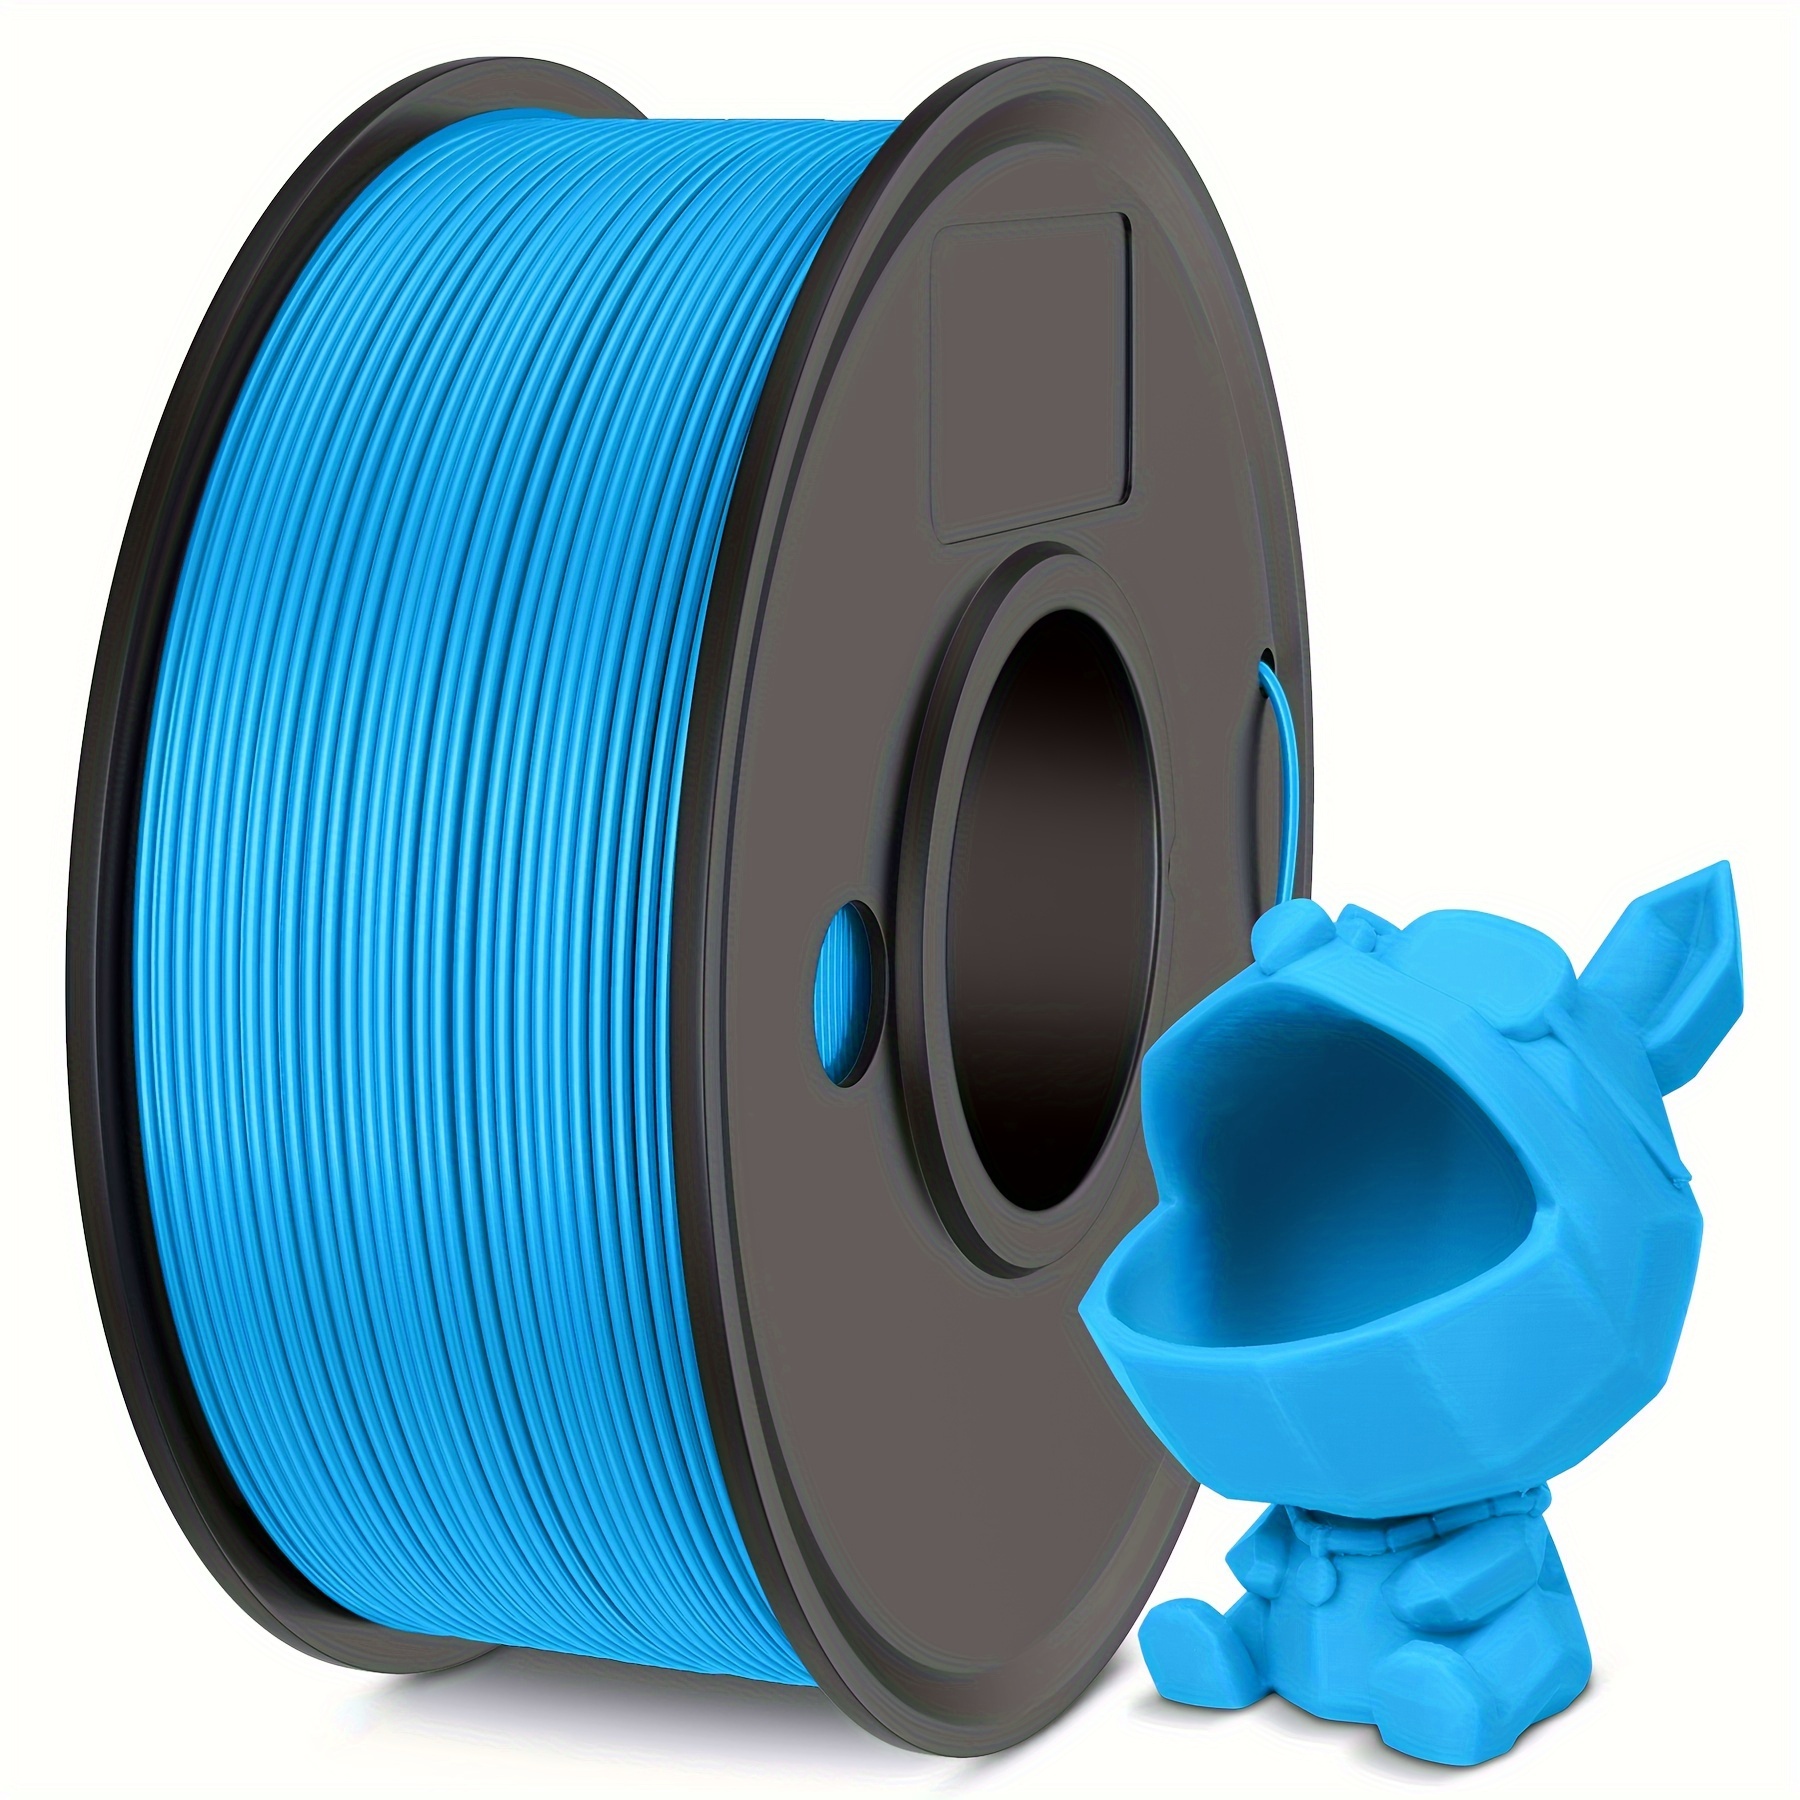 Eryone Glitter PETG Filament 1.75mm 3D Printing Sparkly Shining Material  ±0.03mm 1kg Spool For 3d printer Fast Free Shipping